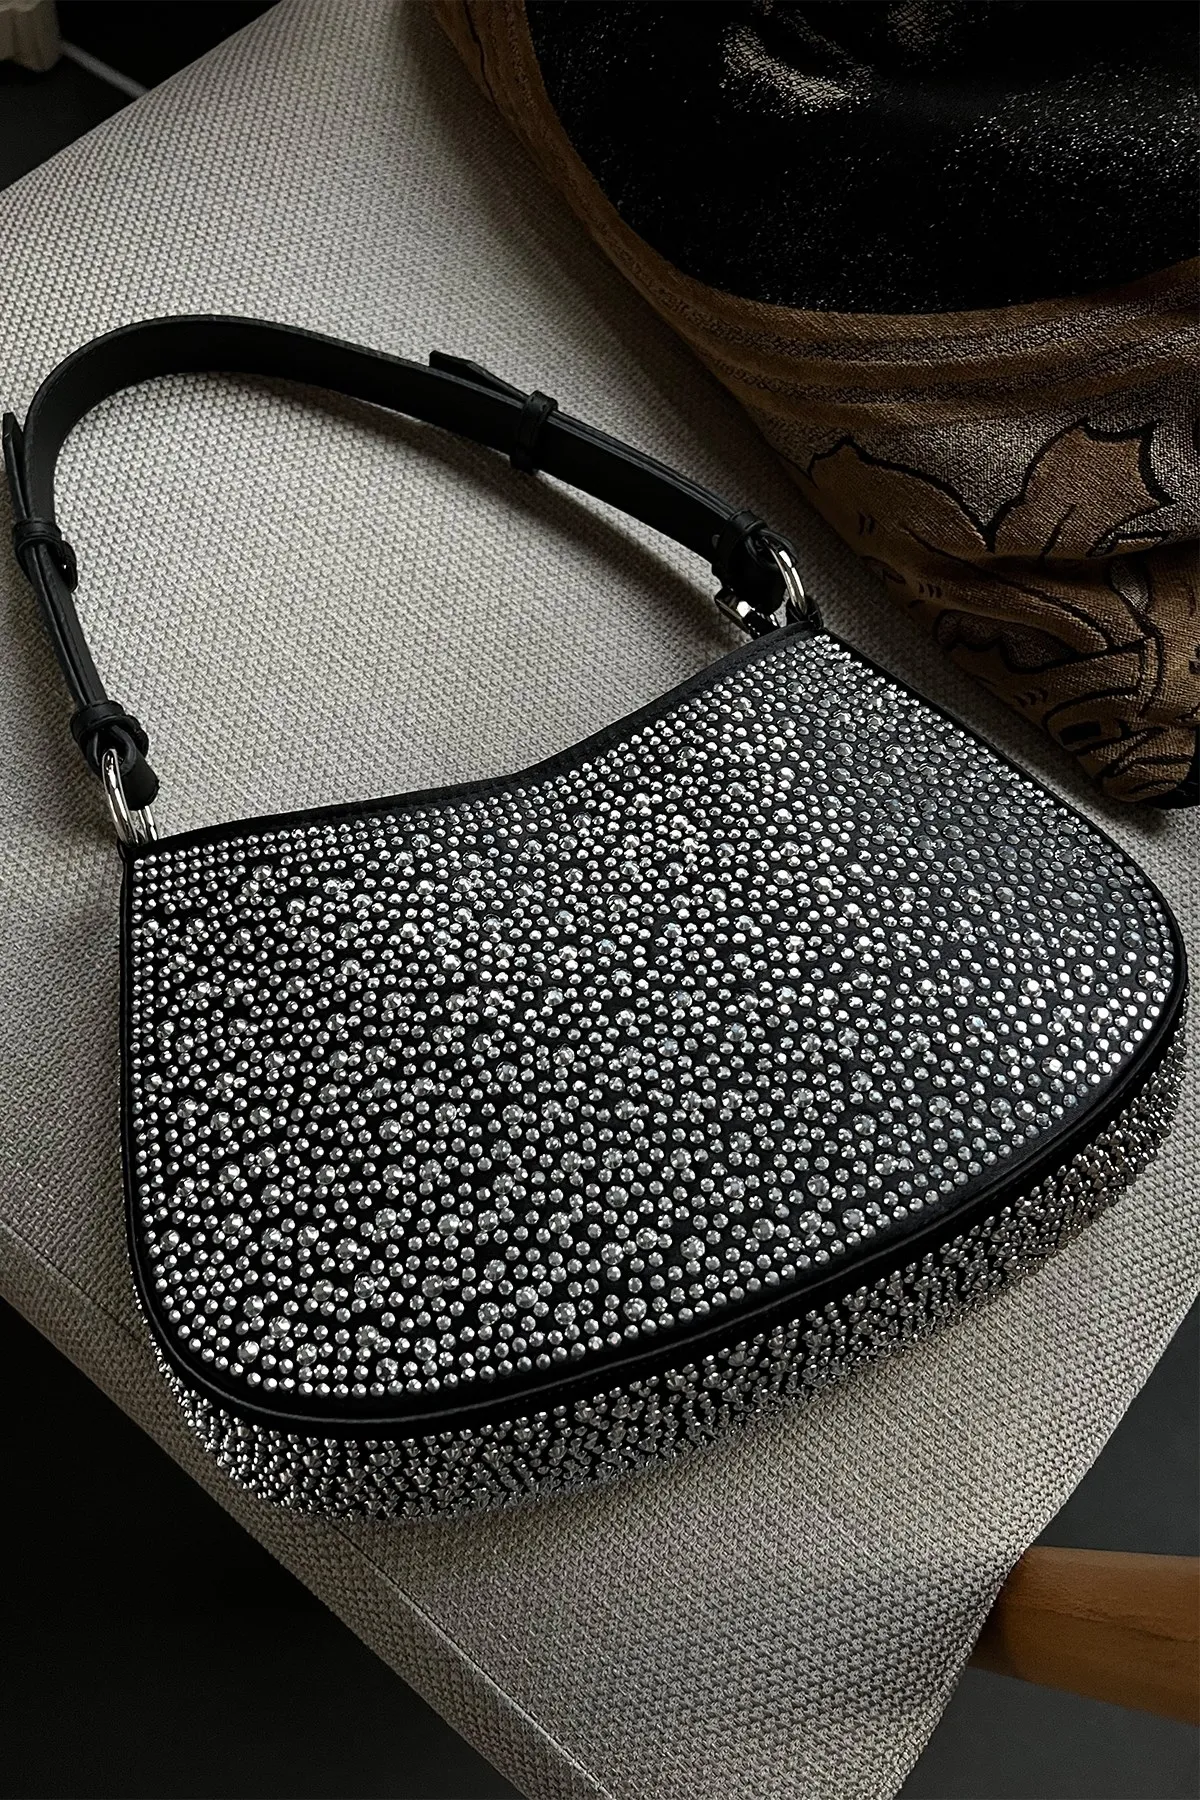 Nadia Stone Detailed Black Oval Women's Shoulder Bag. Stylish Quality Latest Fashion. Top Handle Women's Bag. Girl Bag Party Sex